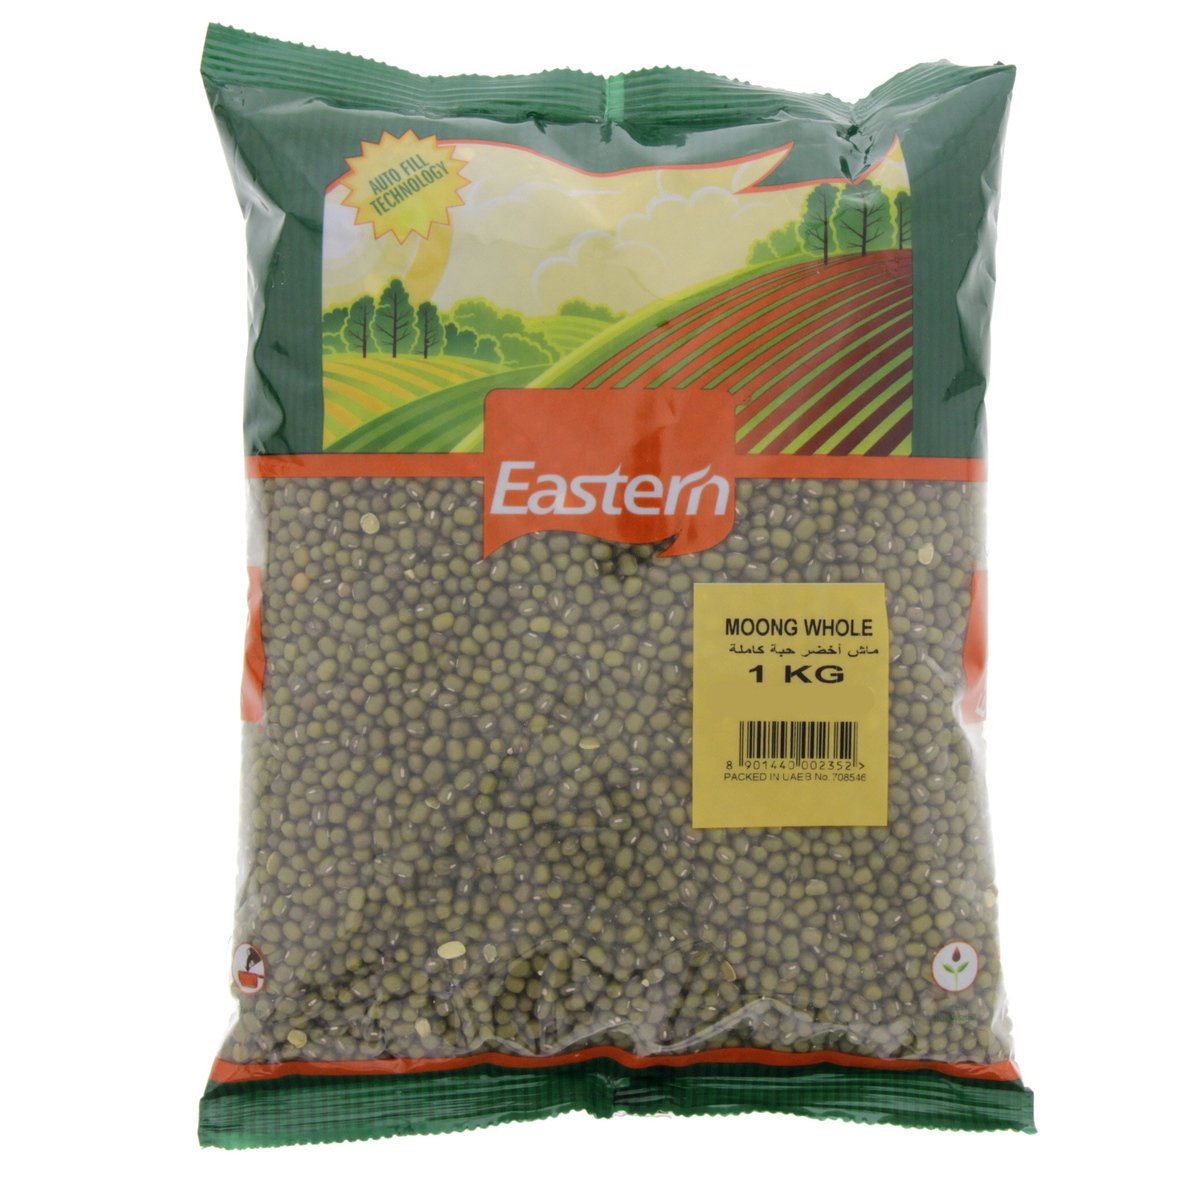 Eastern Moong Whole 1 kg